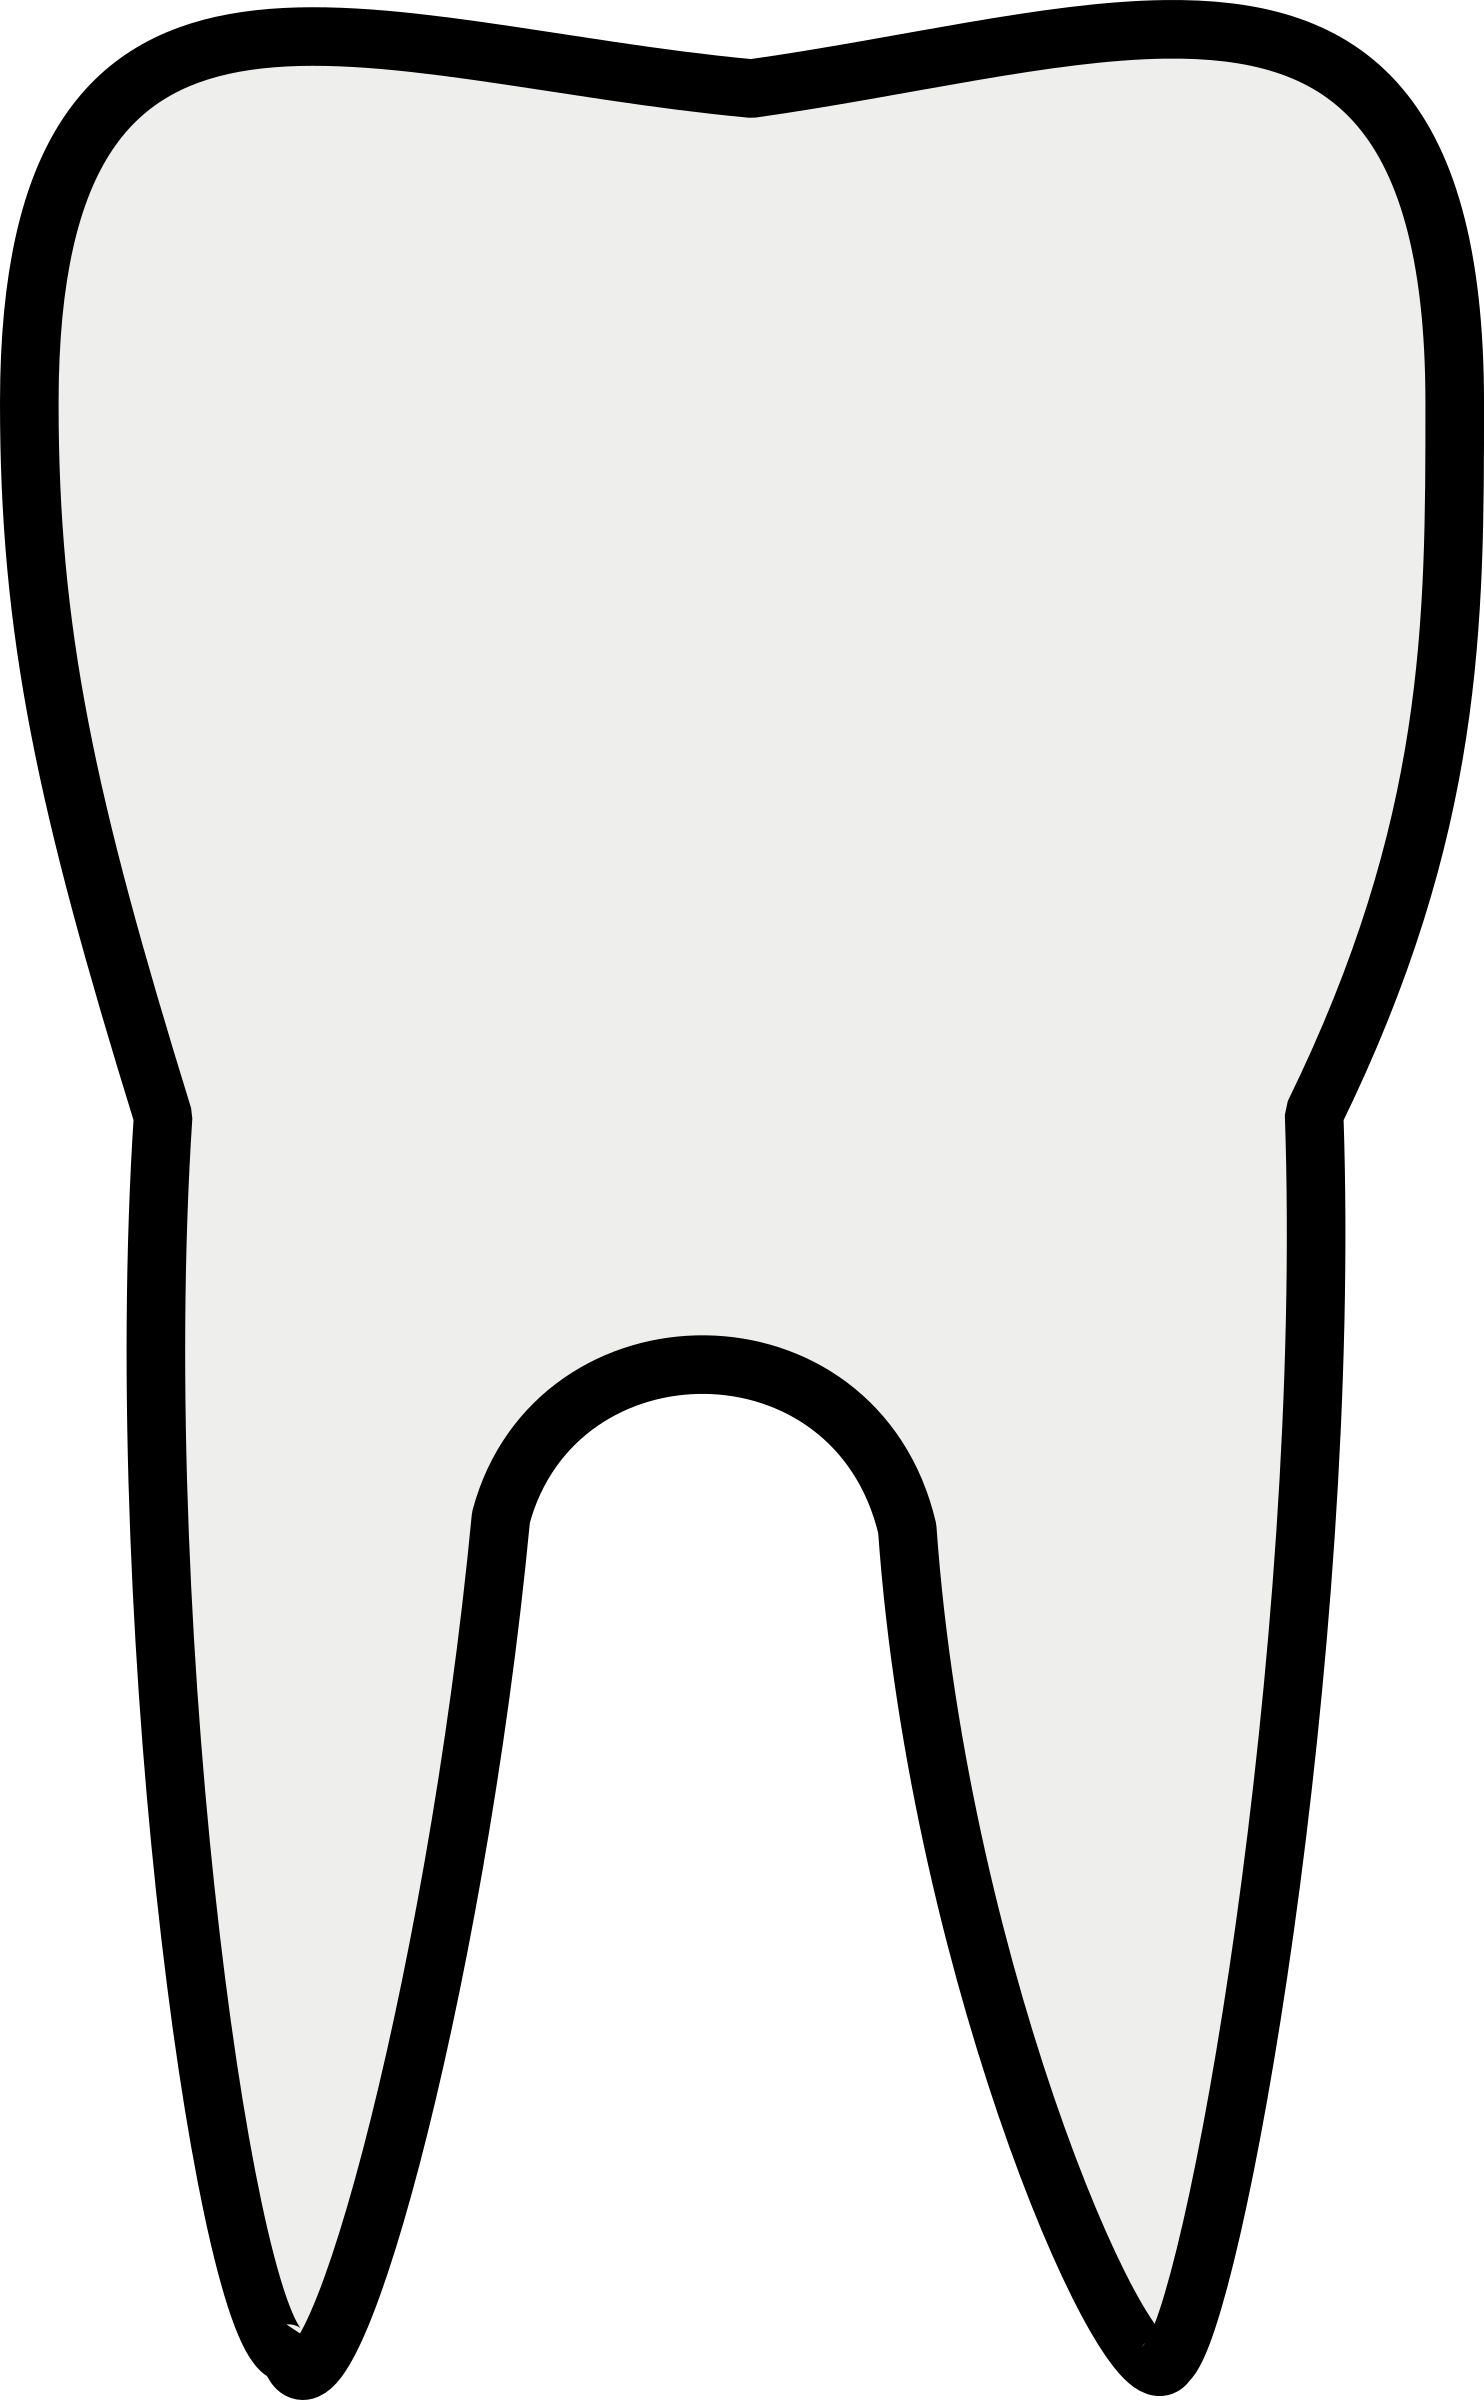 Tooth Outline   Free Cliparts That You Can Download To You Computer